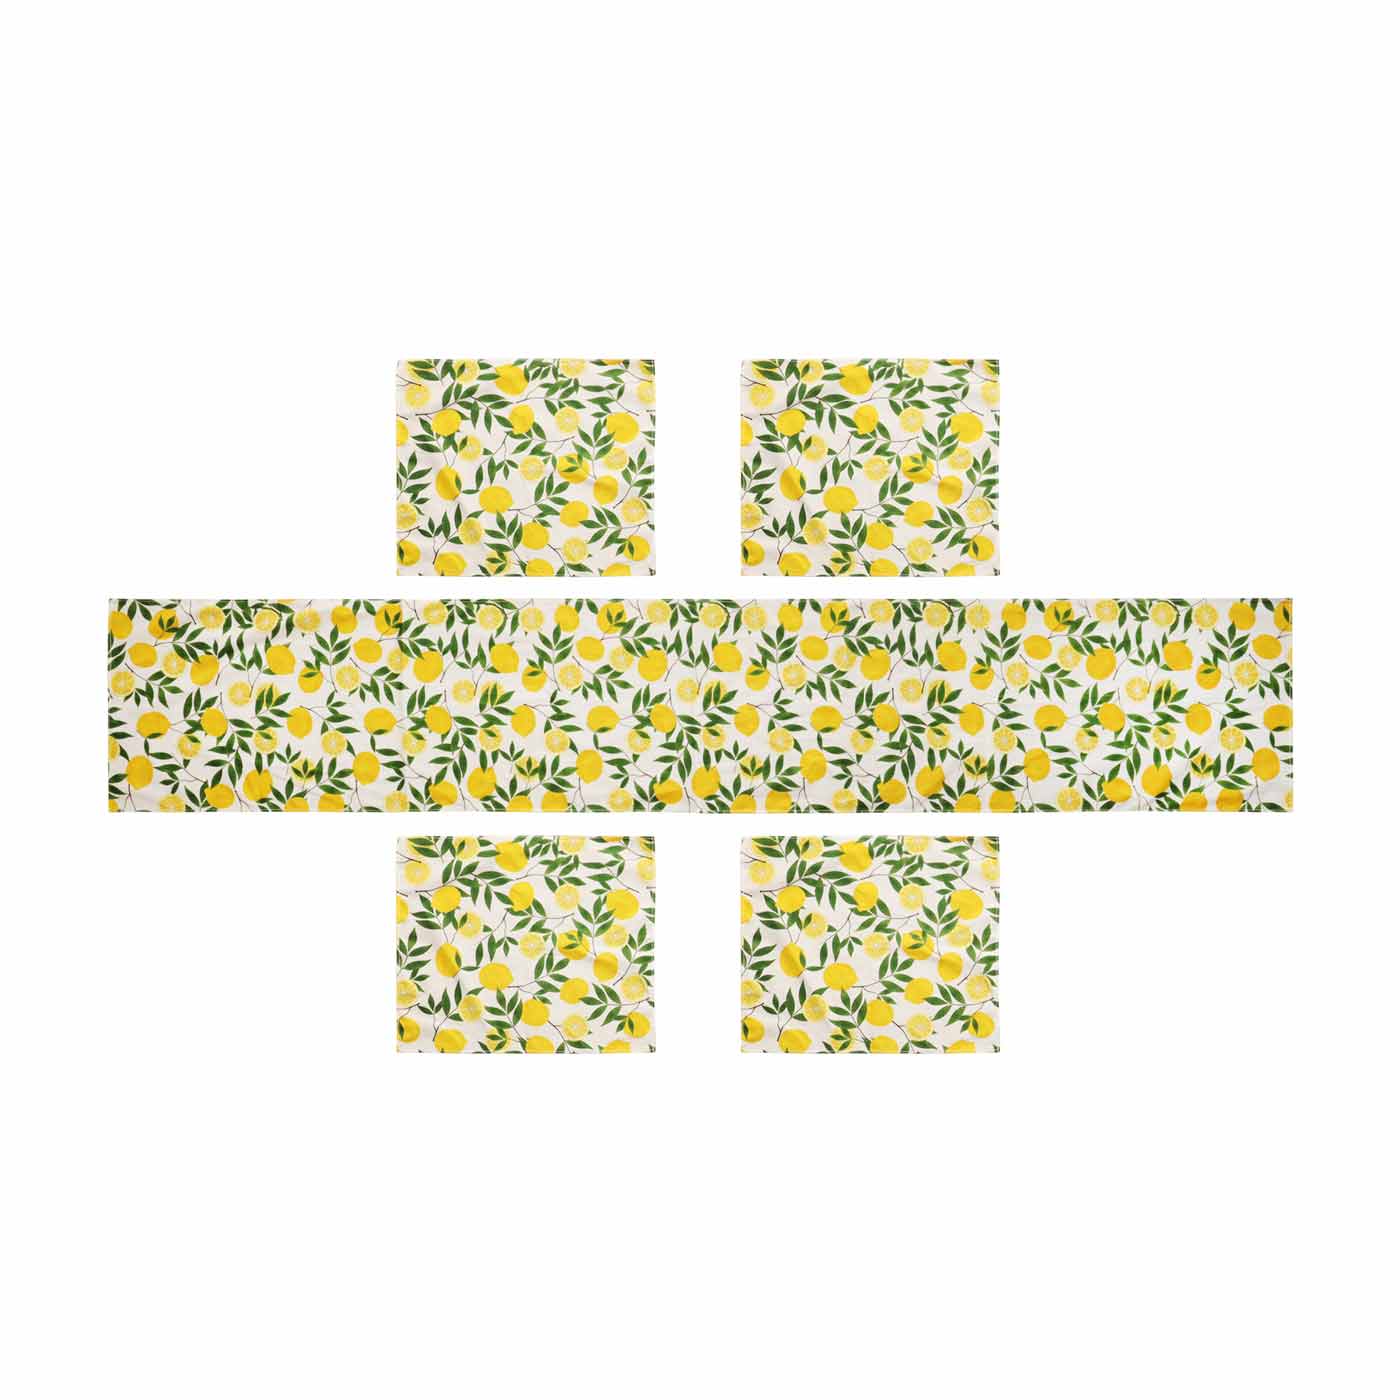 Palermo Sorrento Lemon Table Runner And Placemat Set